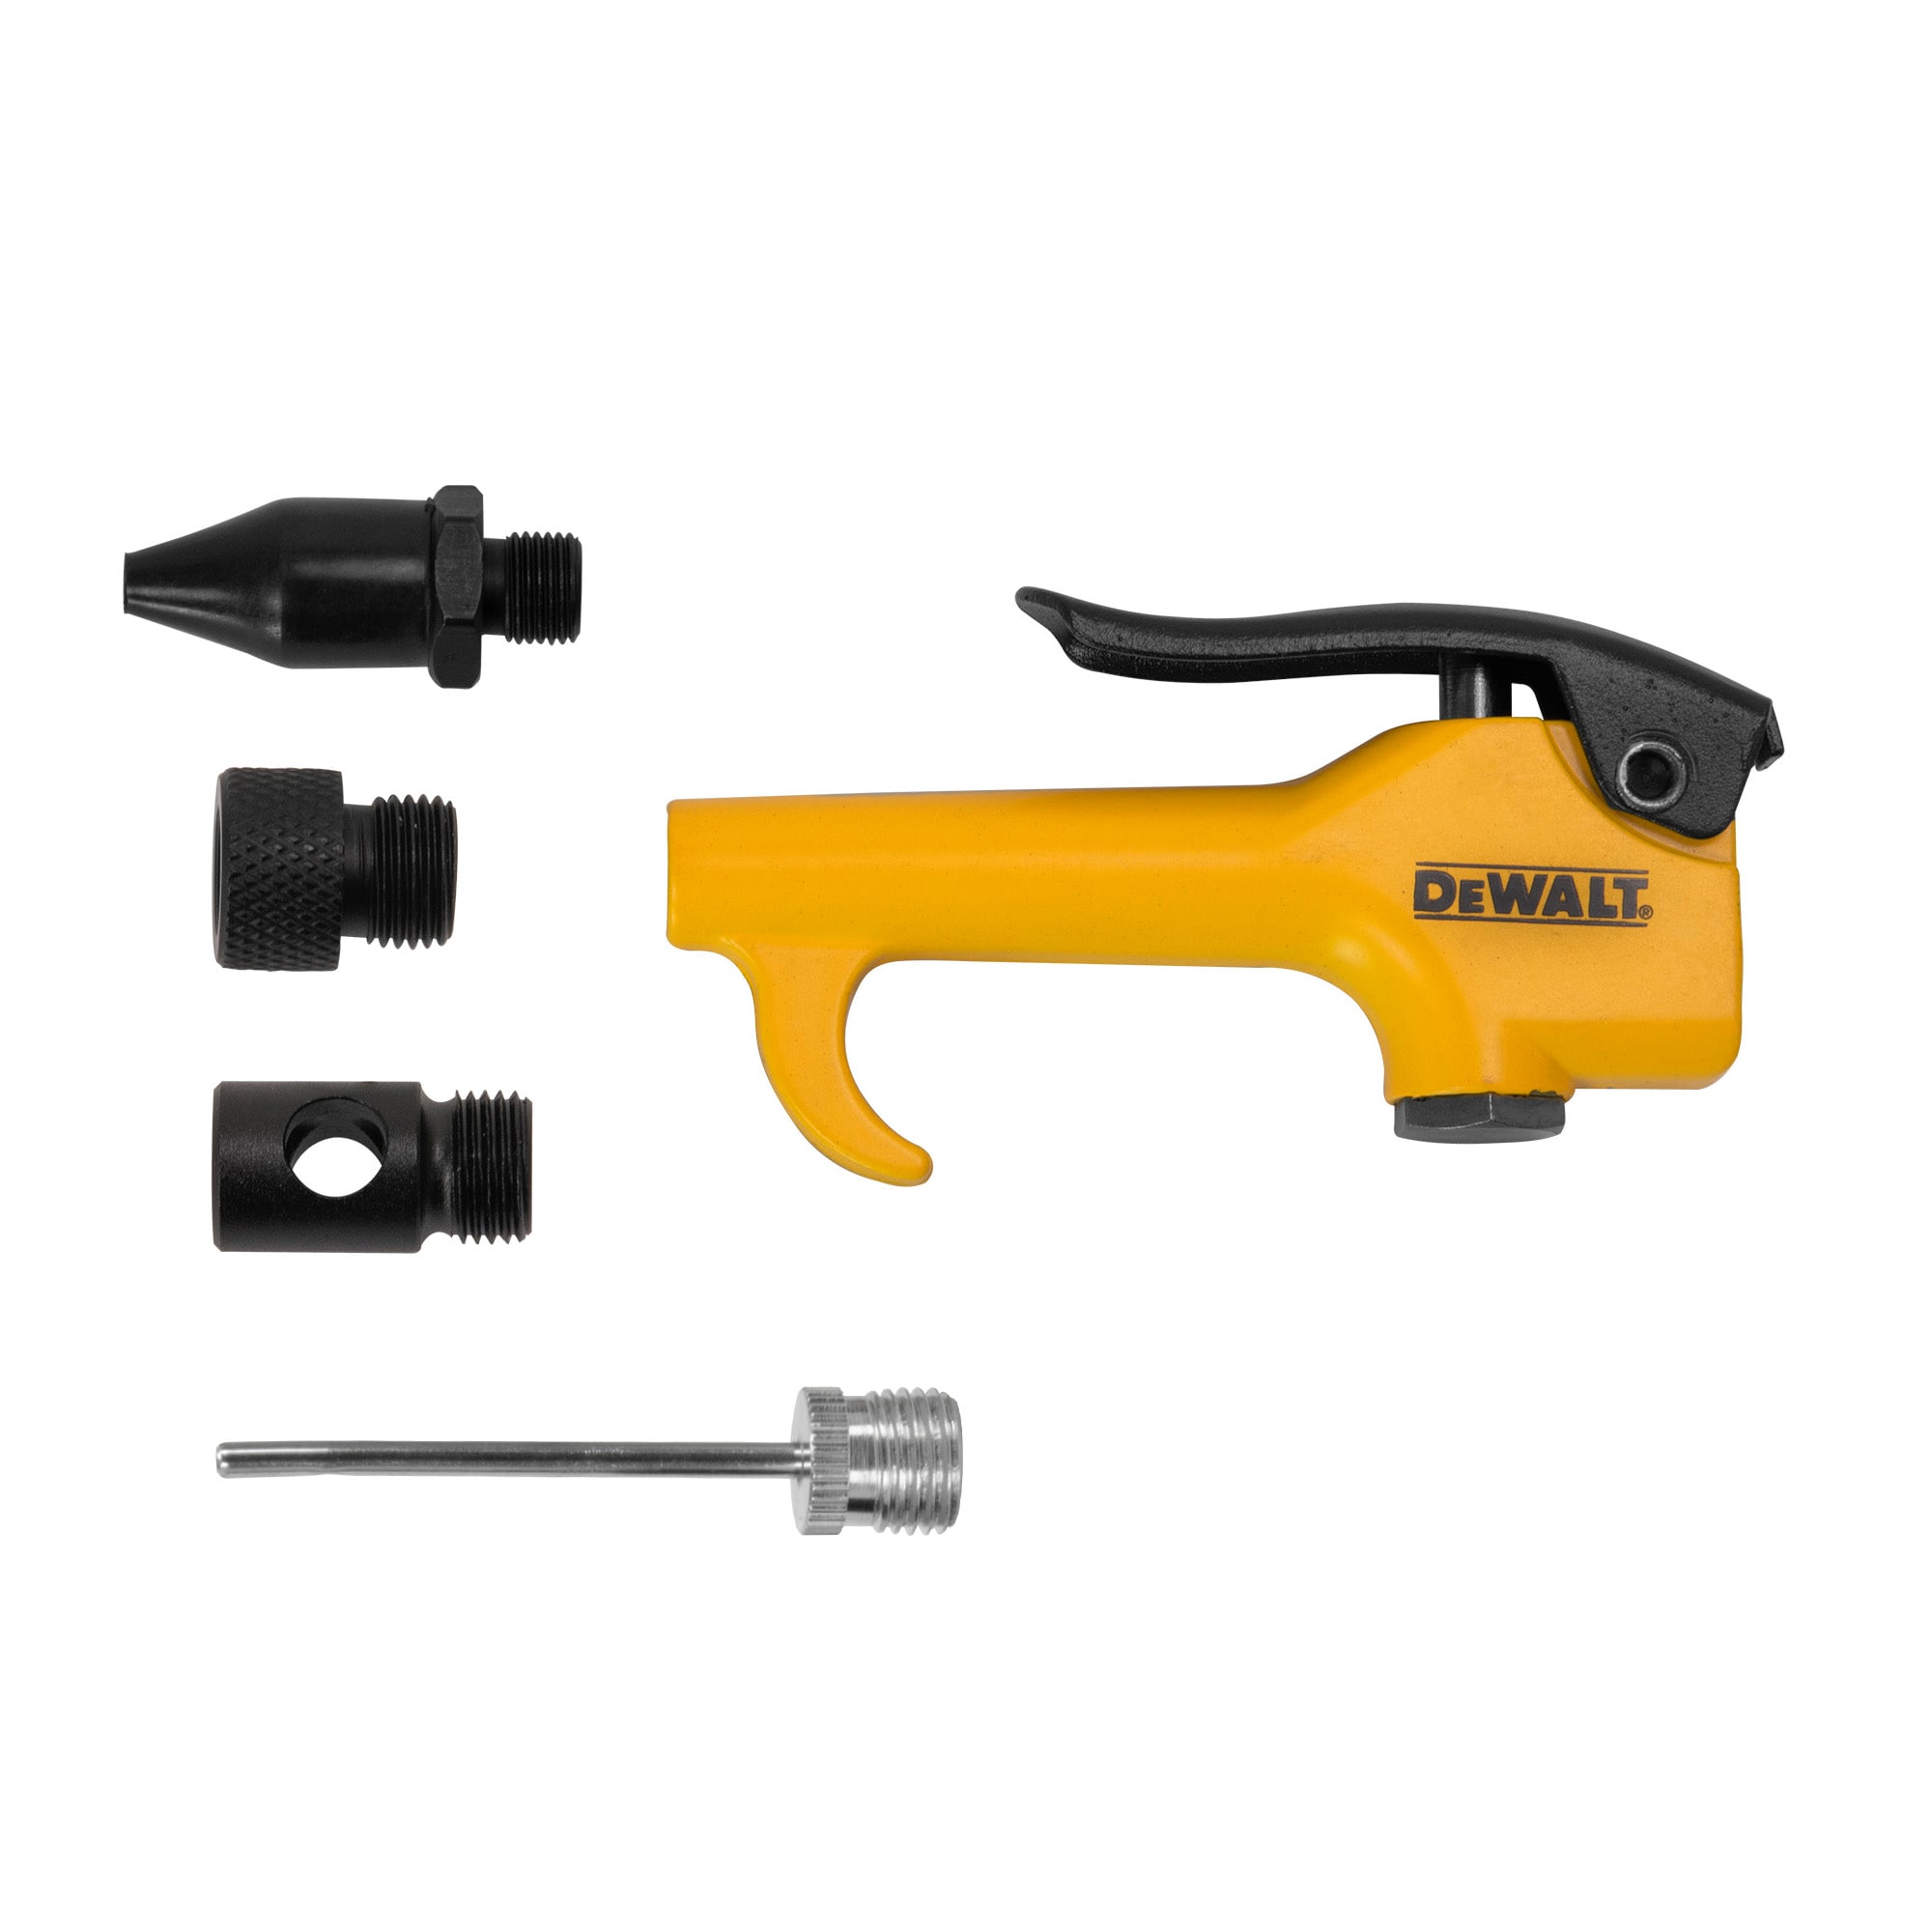 Reviews for DEWALT 20V MAX Cordless Compact Heat Gun, Flat and Hook Nozzle  Attachments, (1) 20V 3.0Ah Battery, and 12V-20V MAX Charger